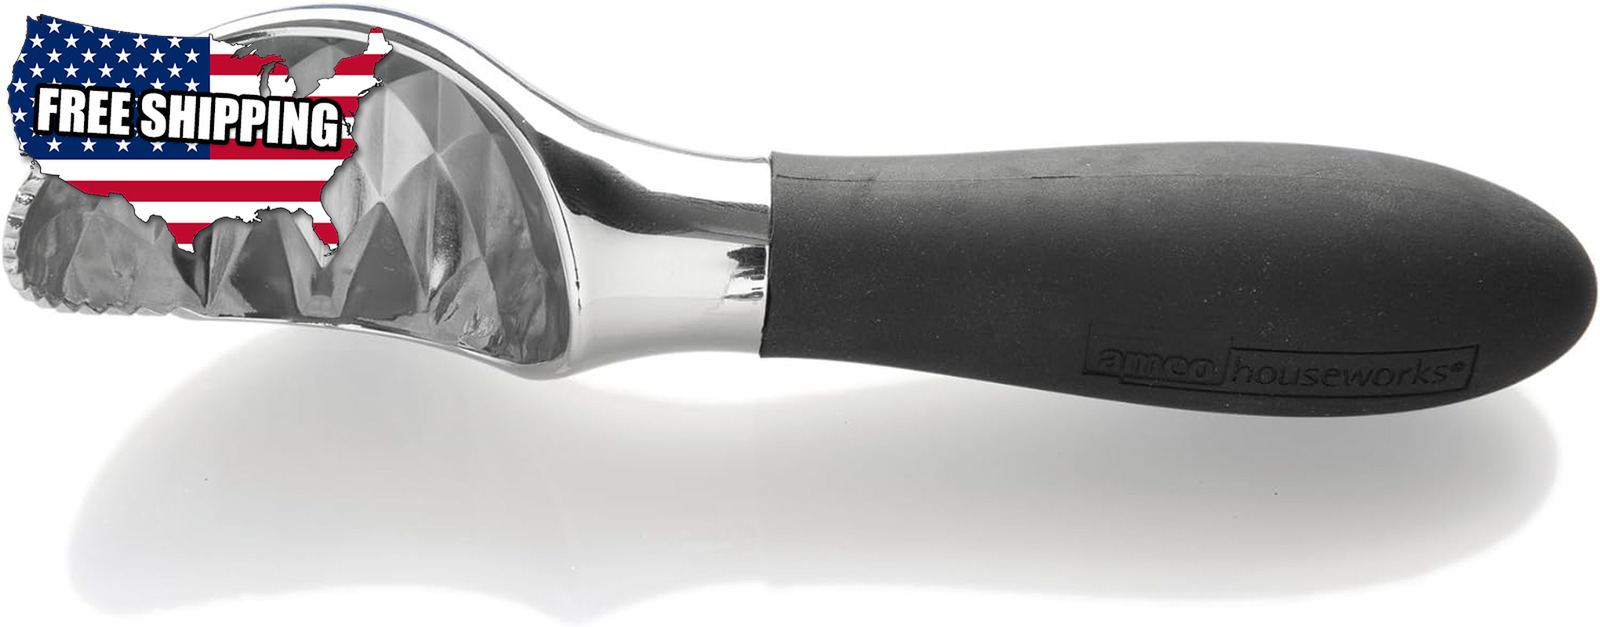 Amco Serrated Ice Cream Scoop Black 7.25 Inch NEW  USA ONLY 